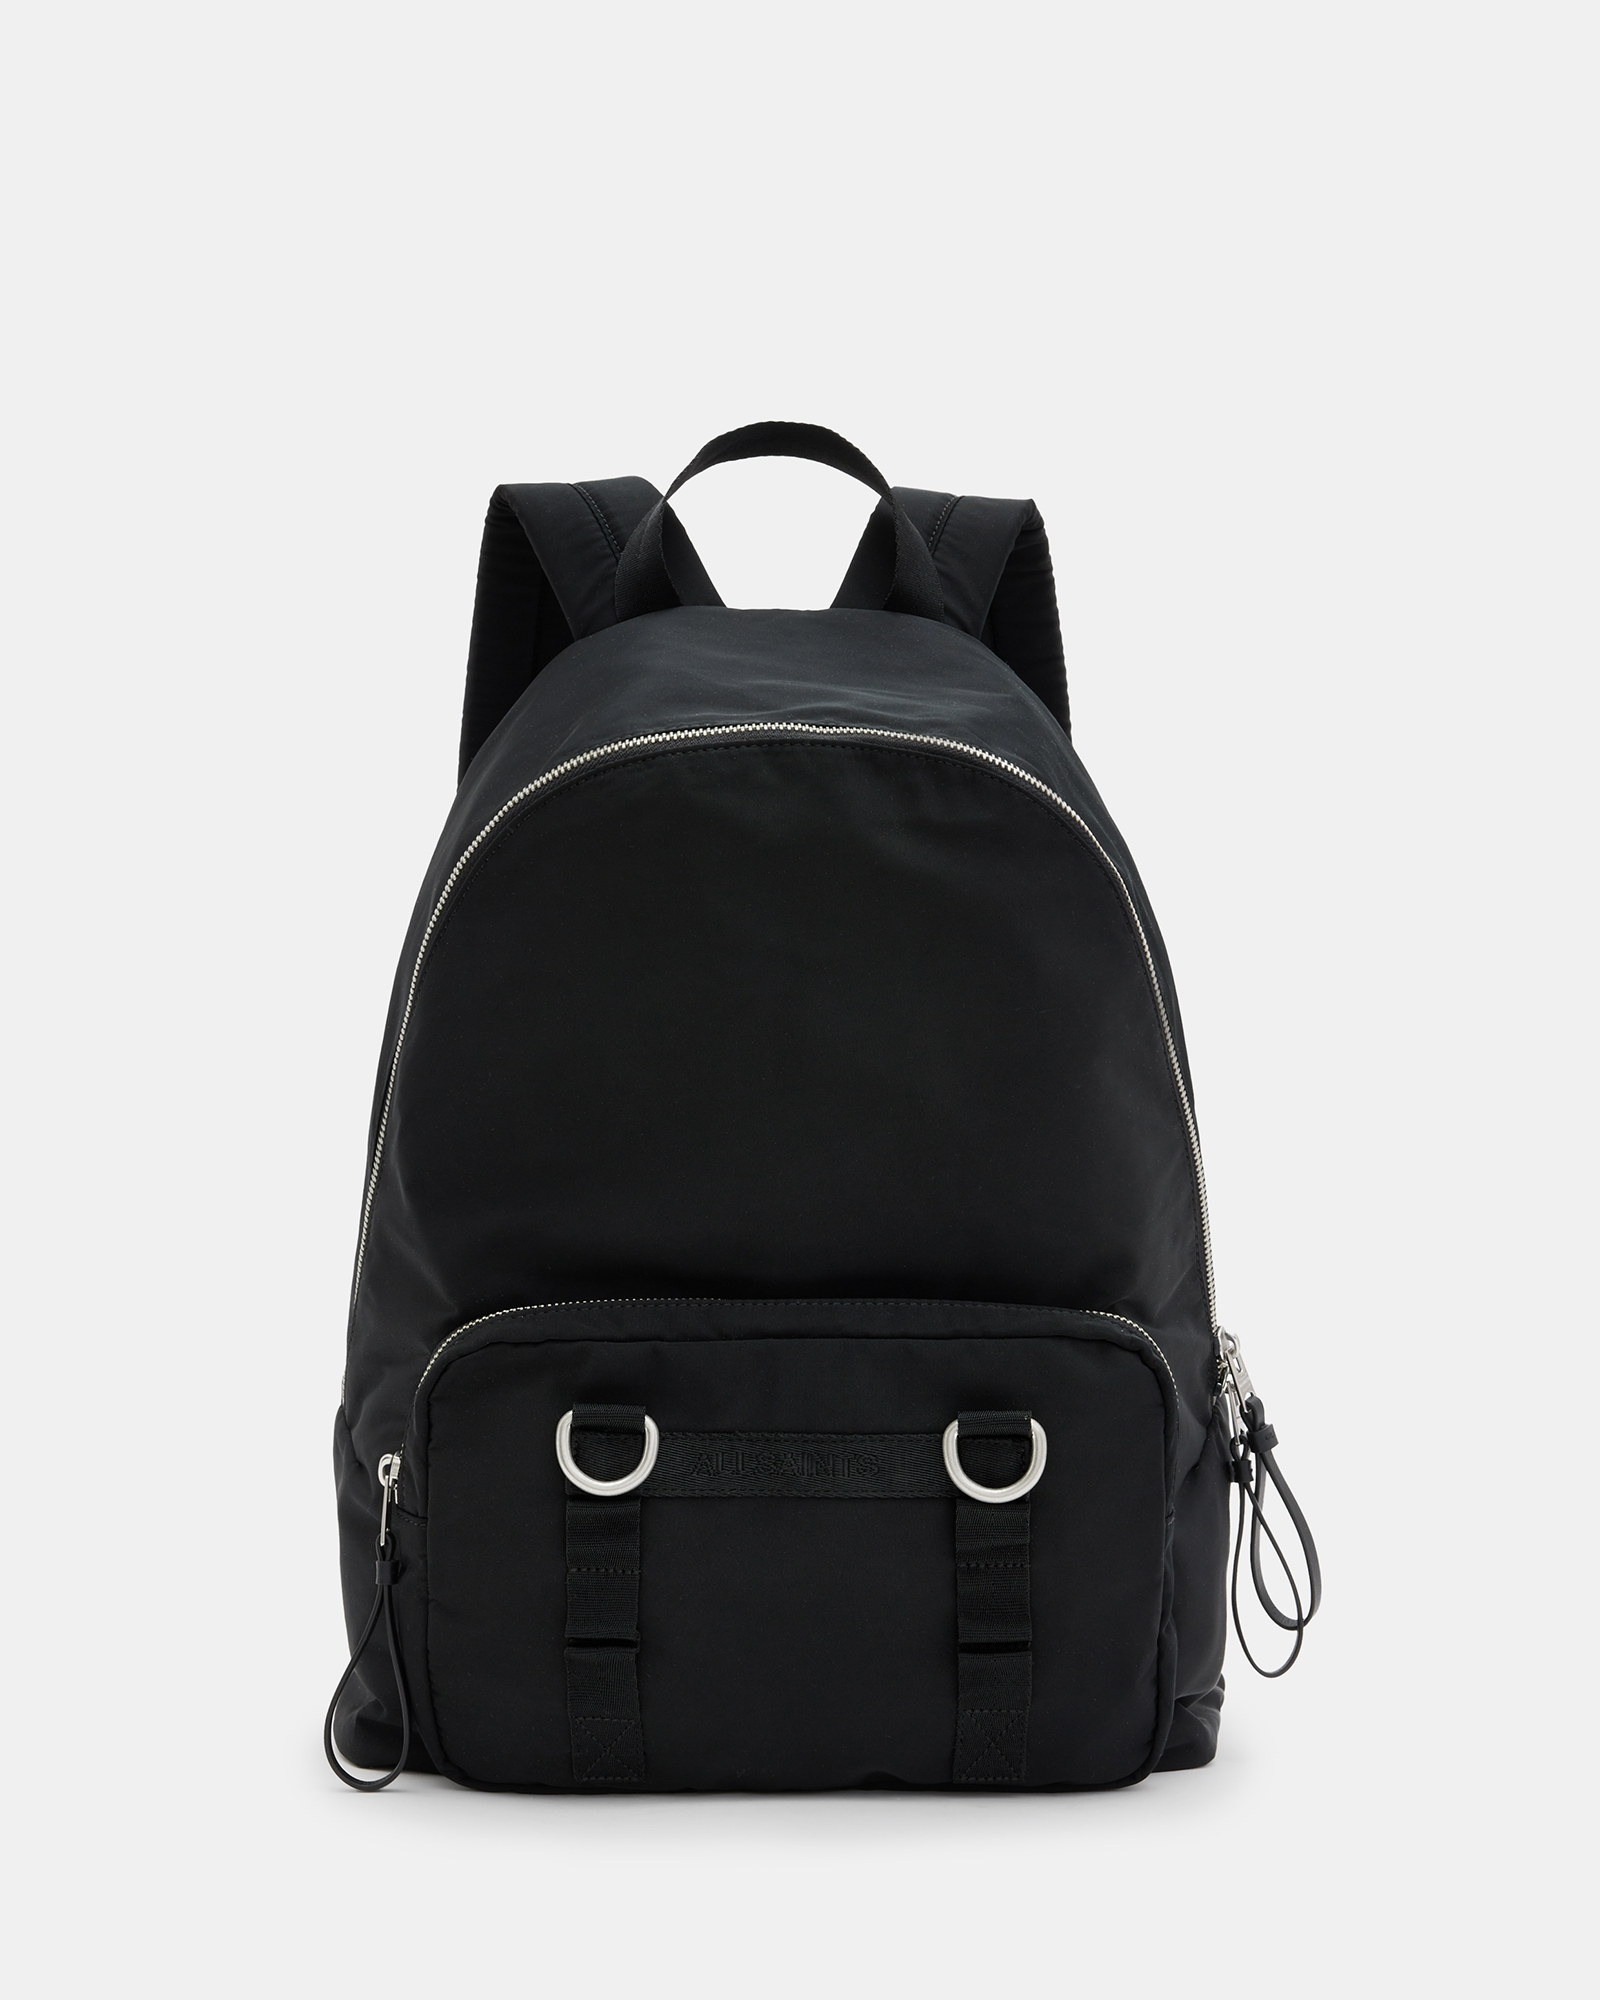 AllSaints Steppe Recycled Backpack,, Black